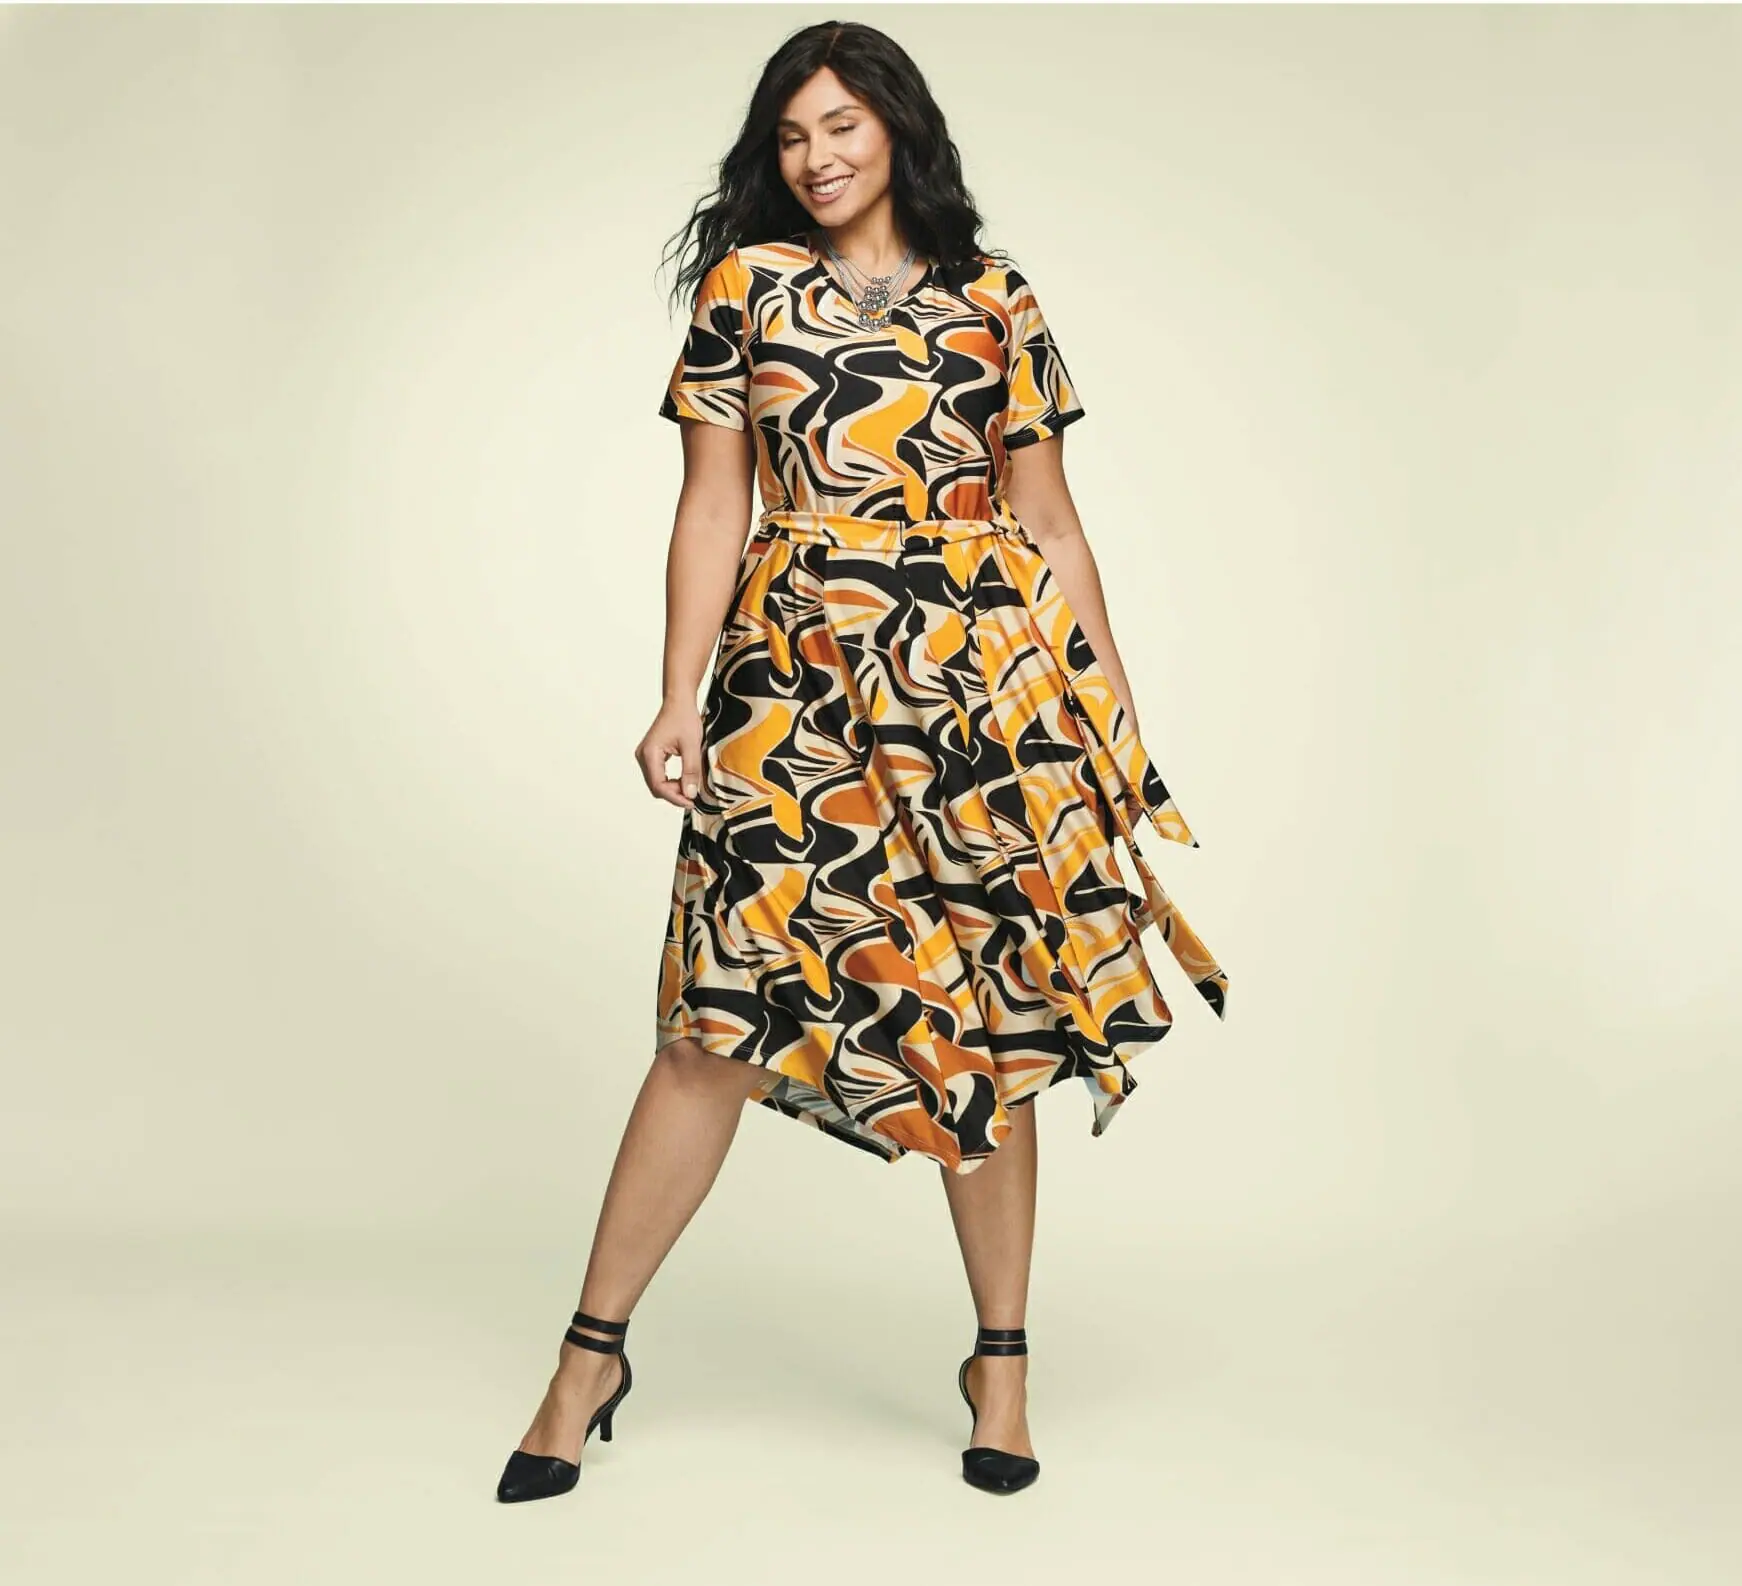 Best dress styles for plus-sizes